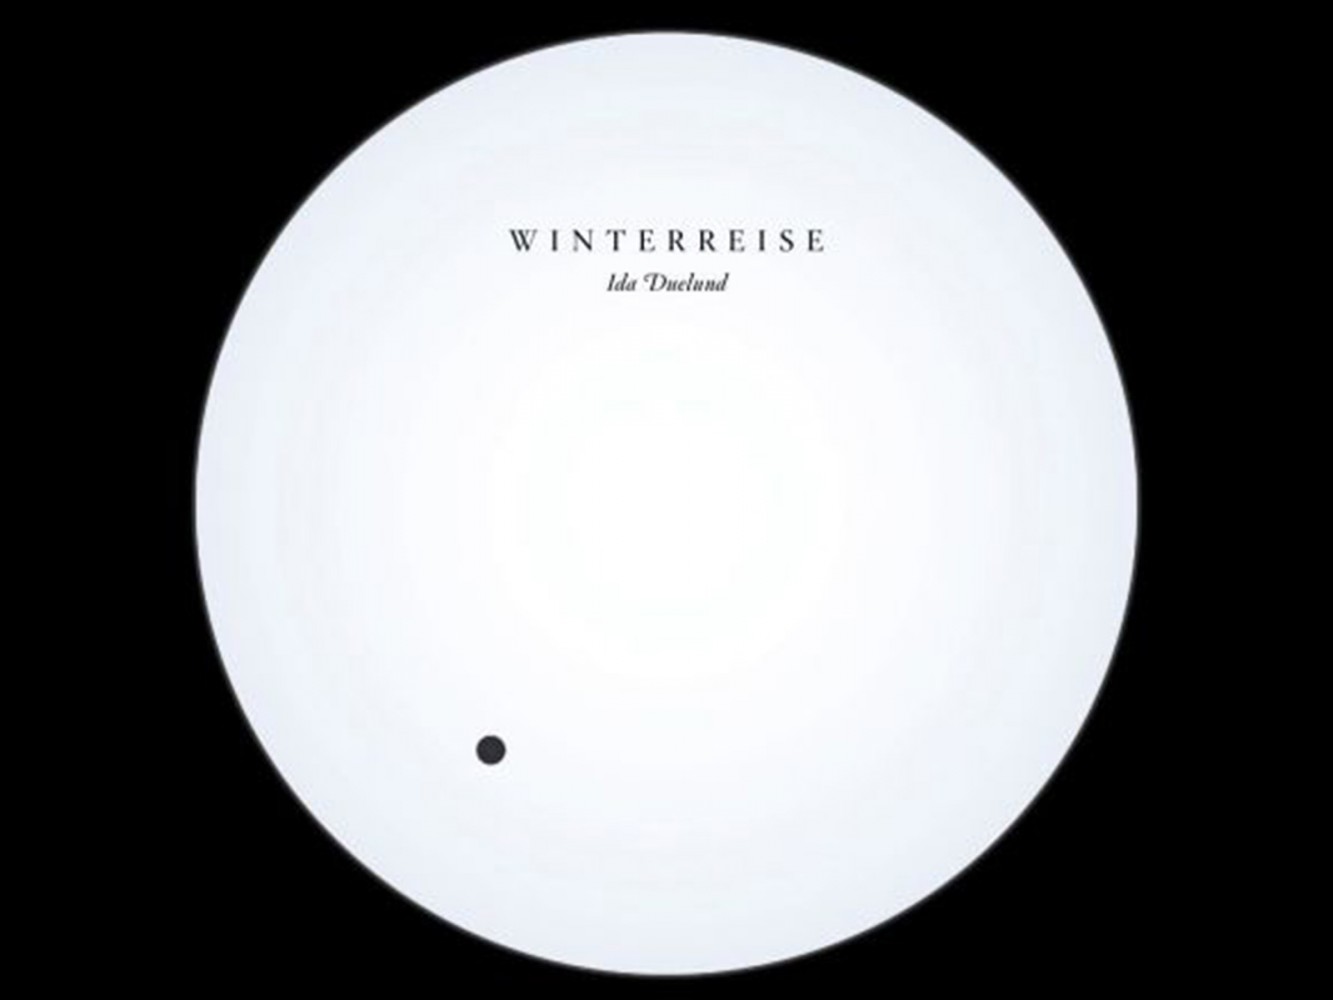 Promo image: a white circle with the words Winterreise Ida Dueland on it set against a black background